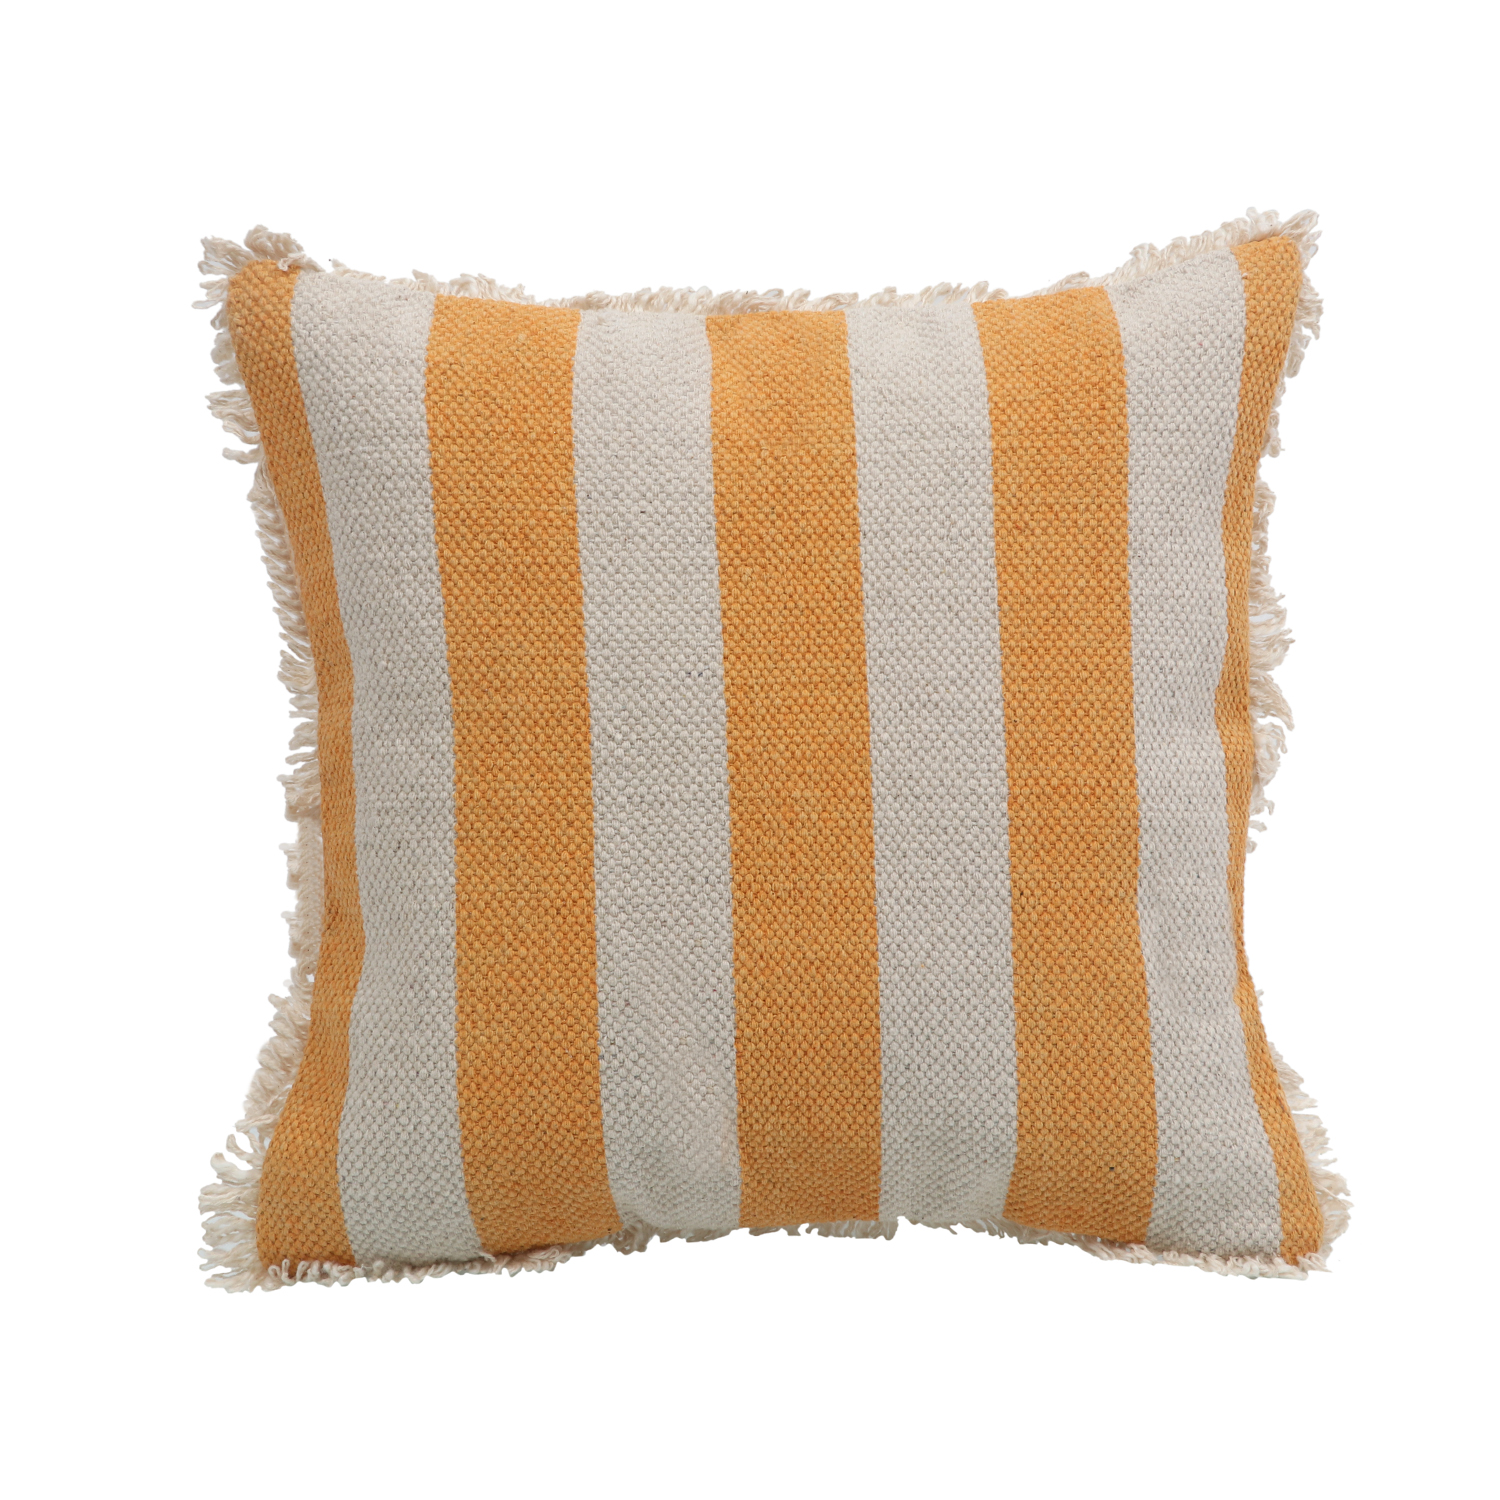 Printed Stripe Yellow Cushions Covers with fringes 16X16 Inch